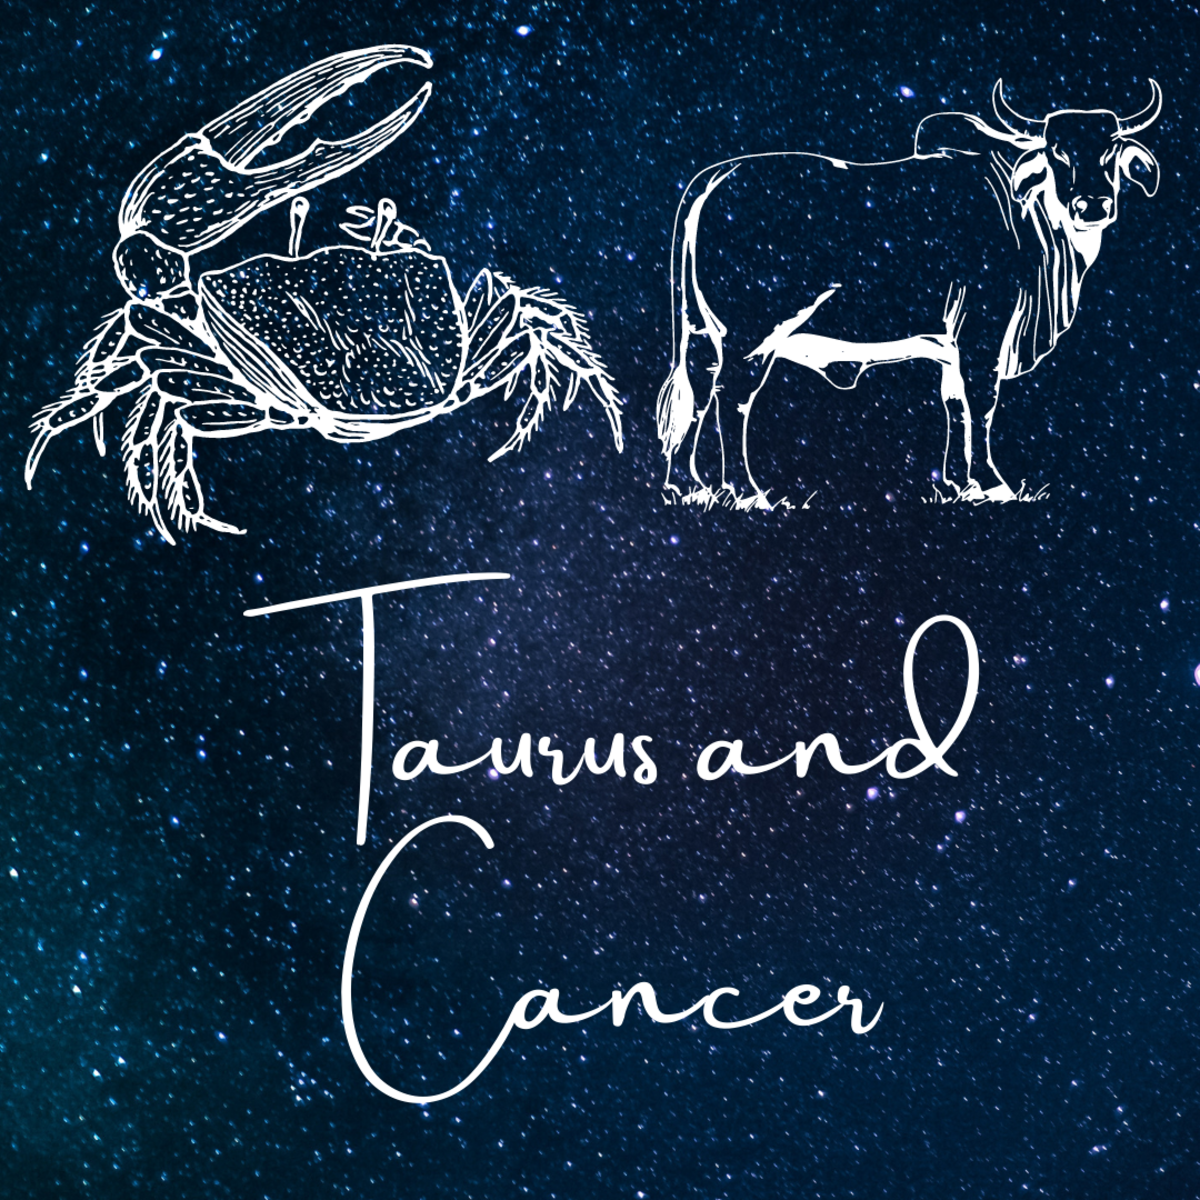 Taurus and cancer sign on galaxy background